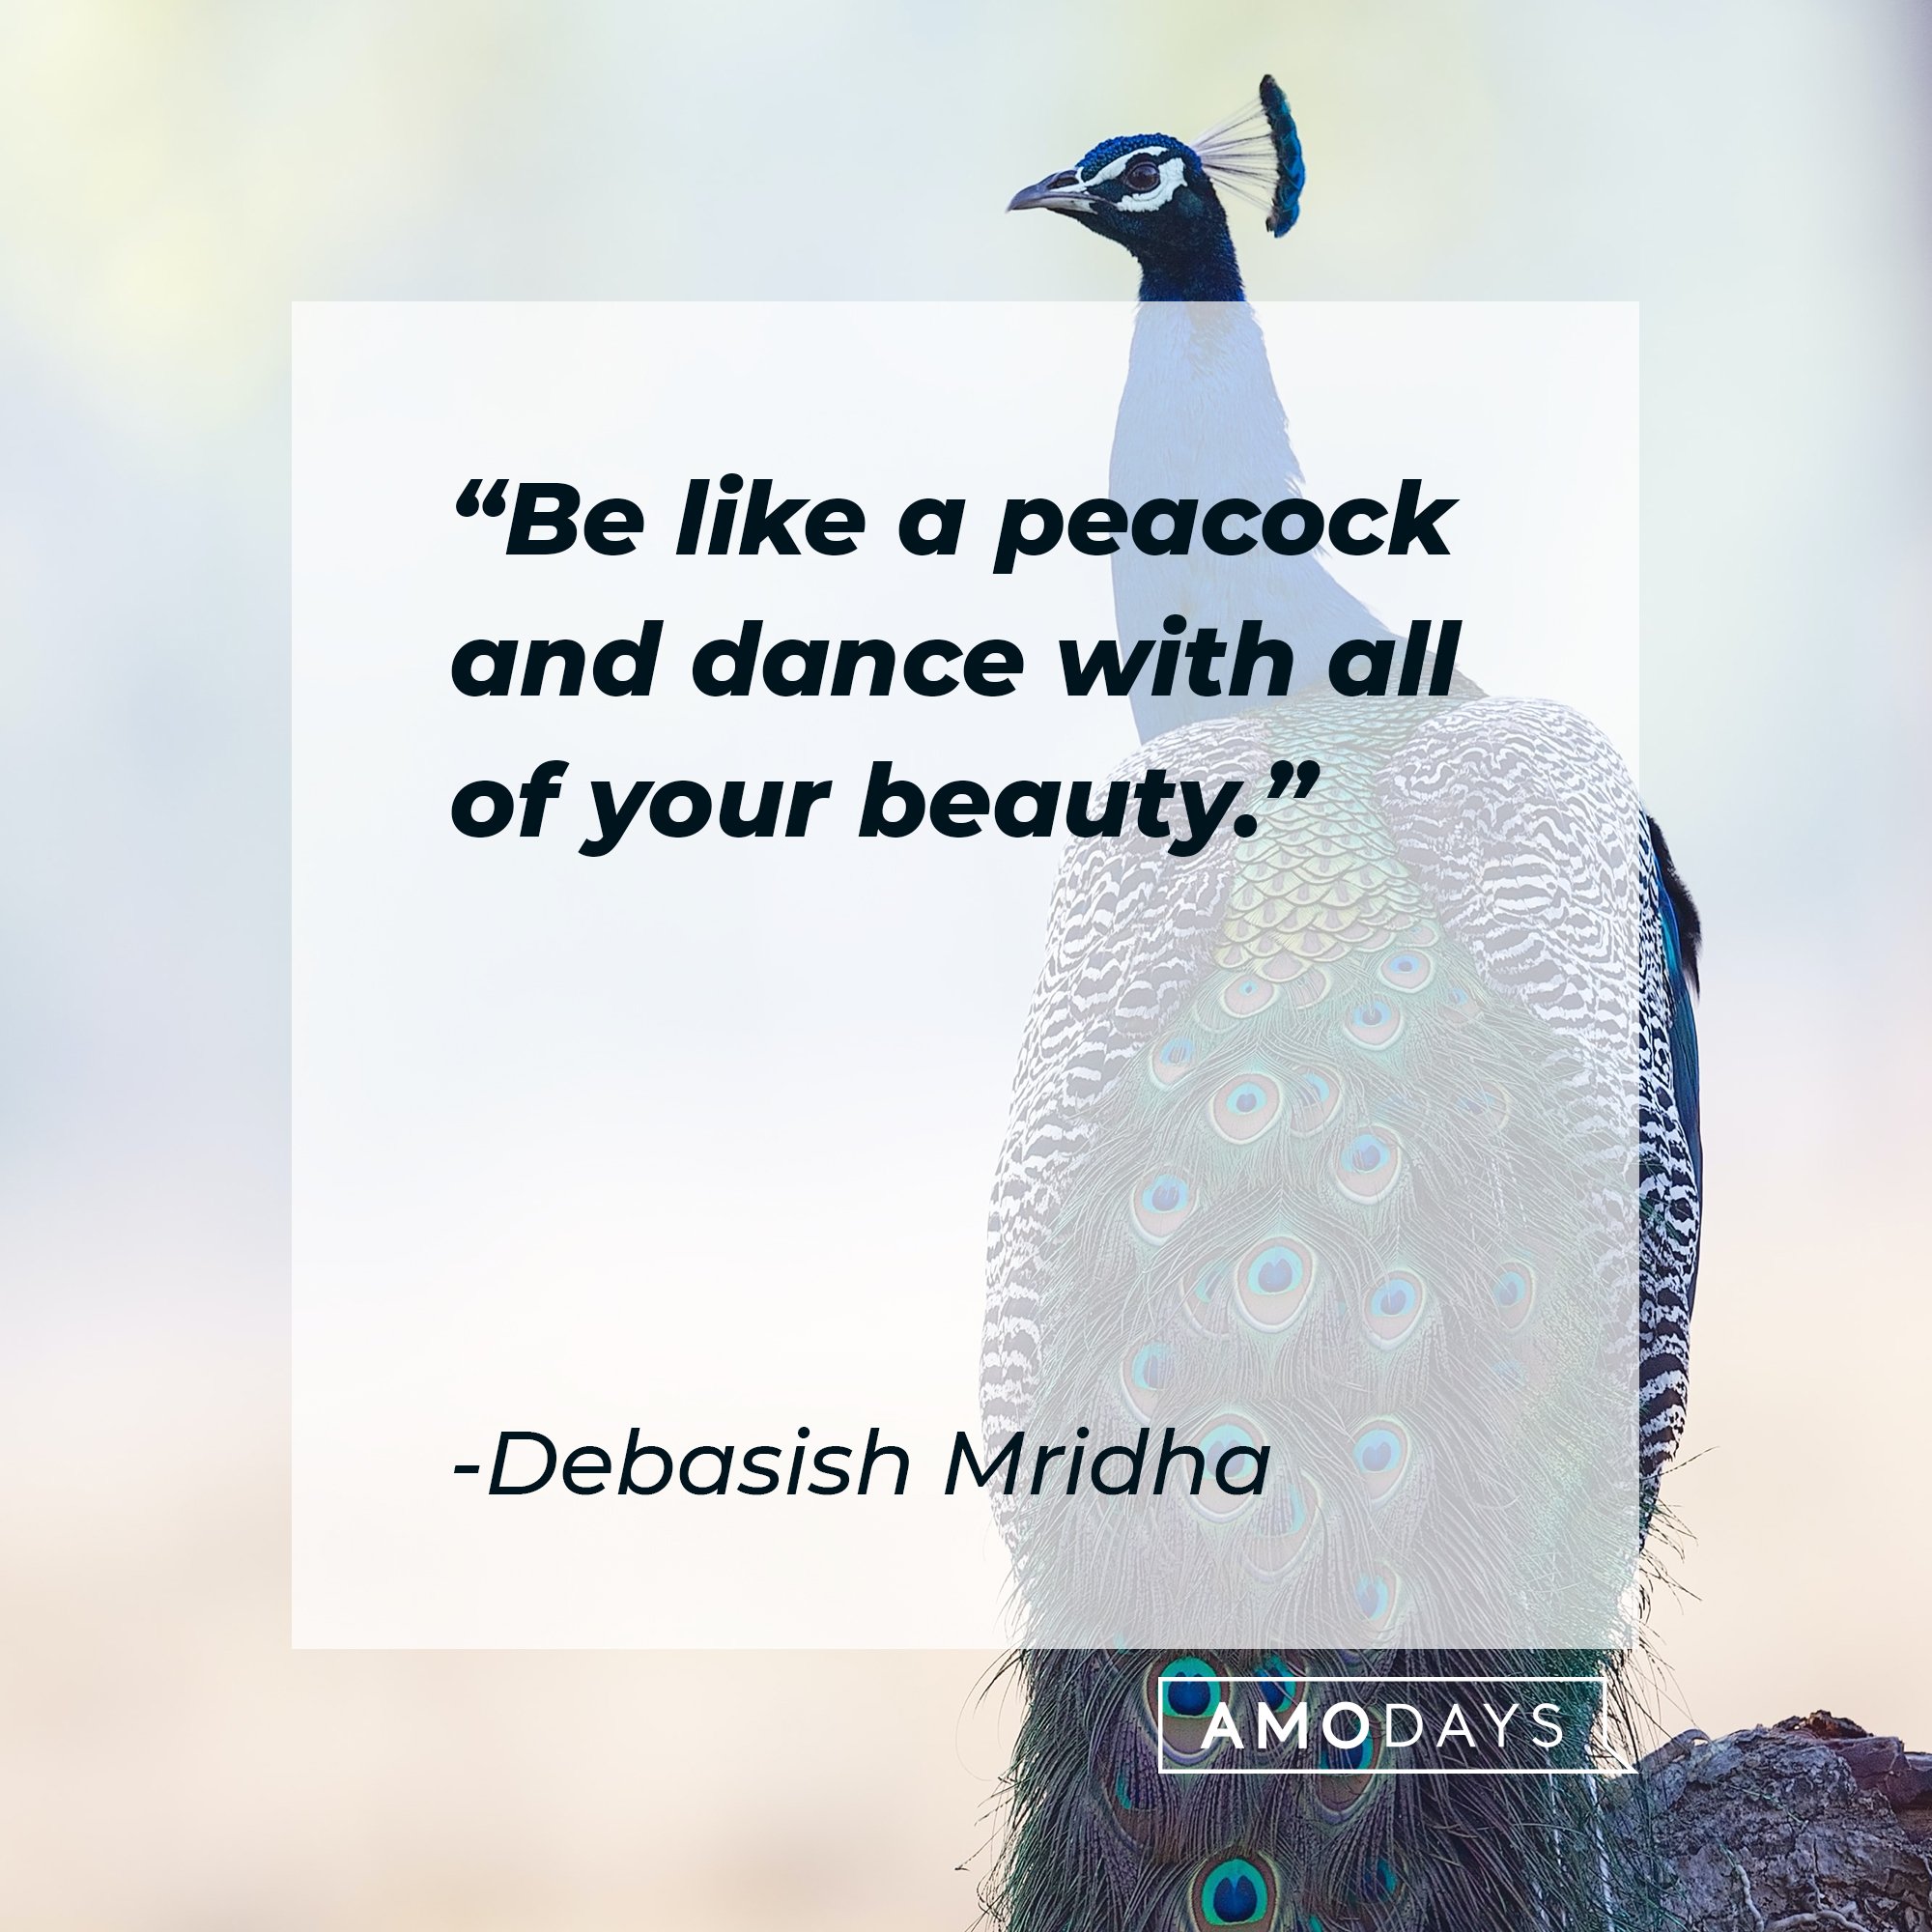 Debasish Mridha's quote: "Be like a peacock and dance with all of your beauty." | Image: AmoDays